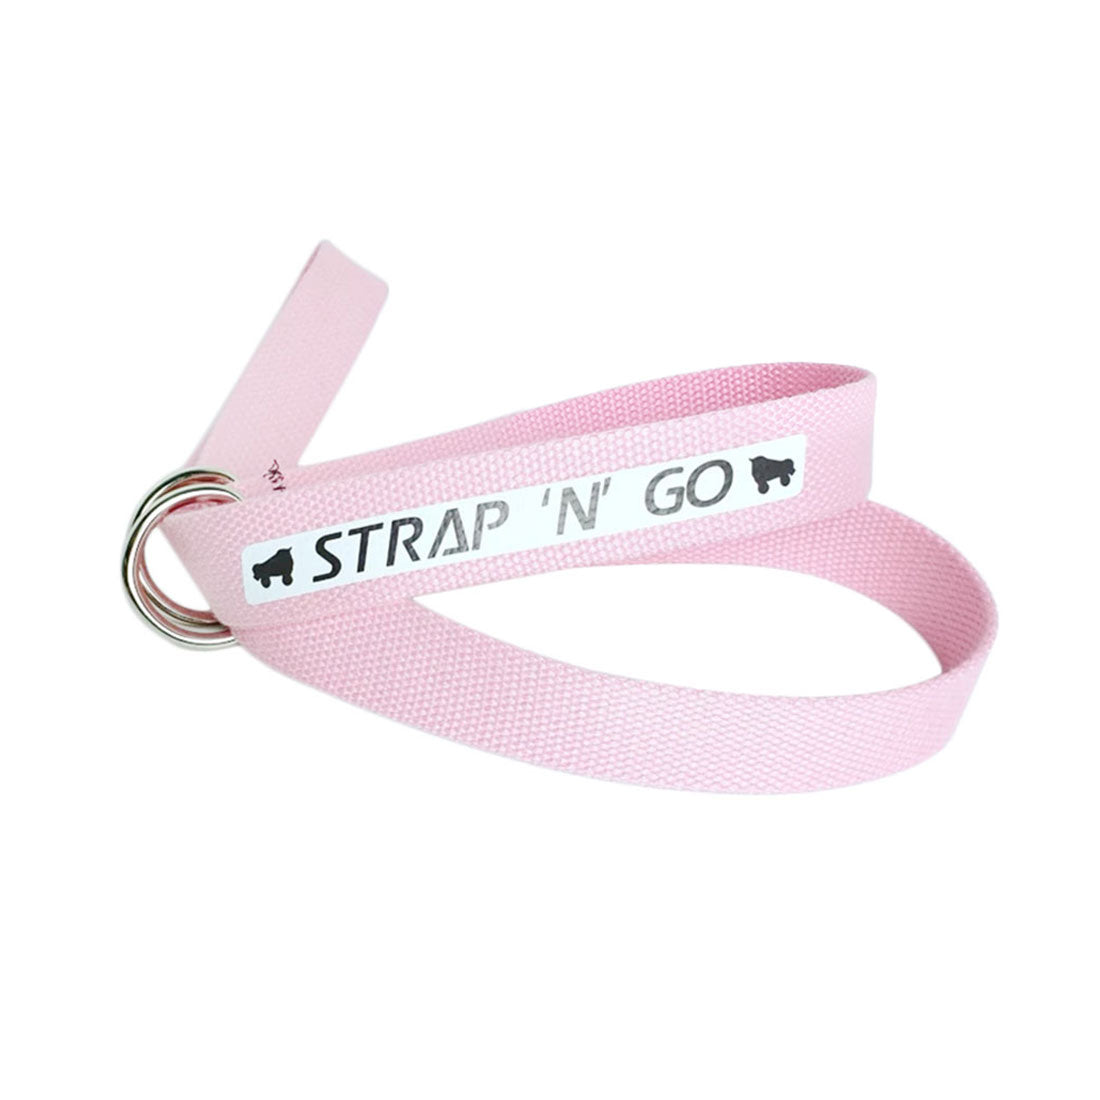 Strap N Go Skate Noose/Leash - Solid Colours Baby Pink Roller Skate Accessories